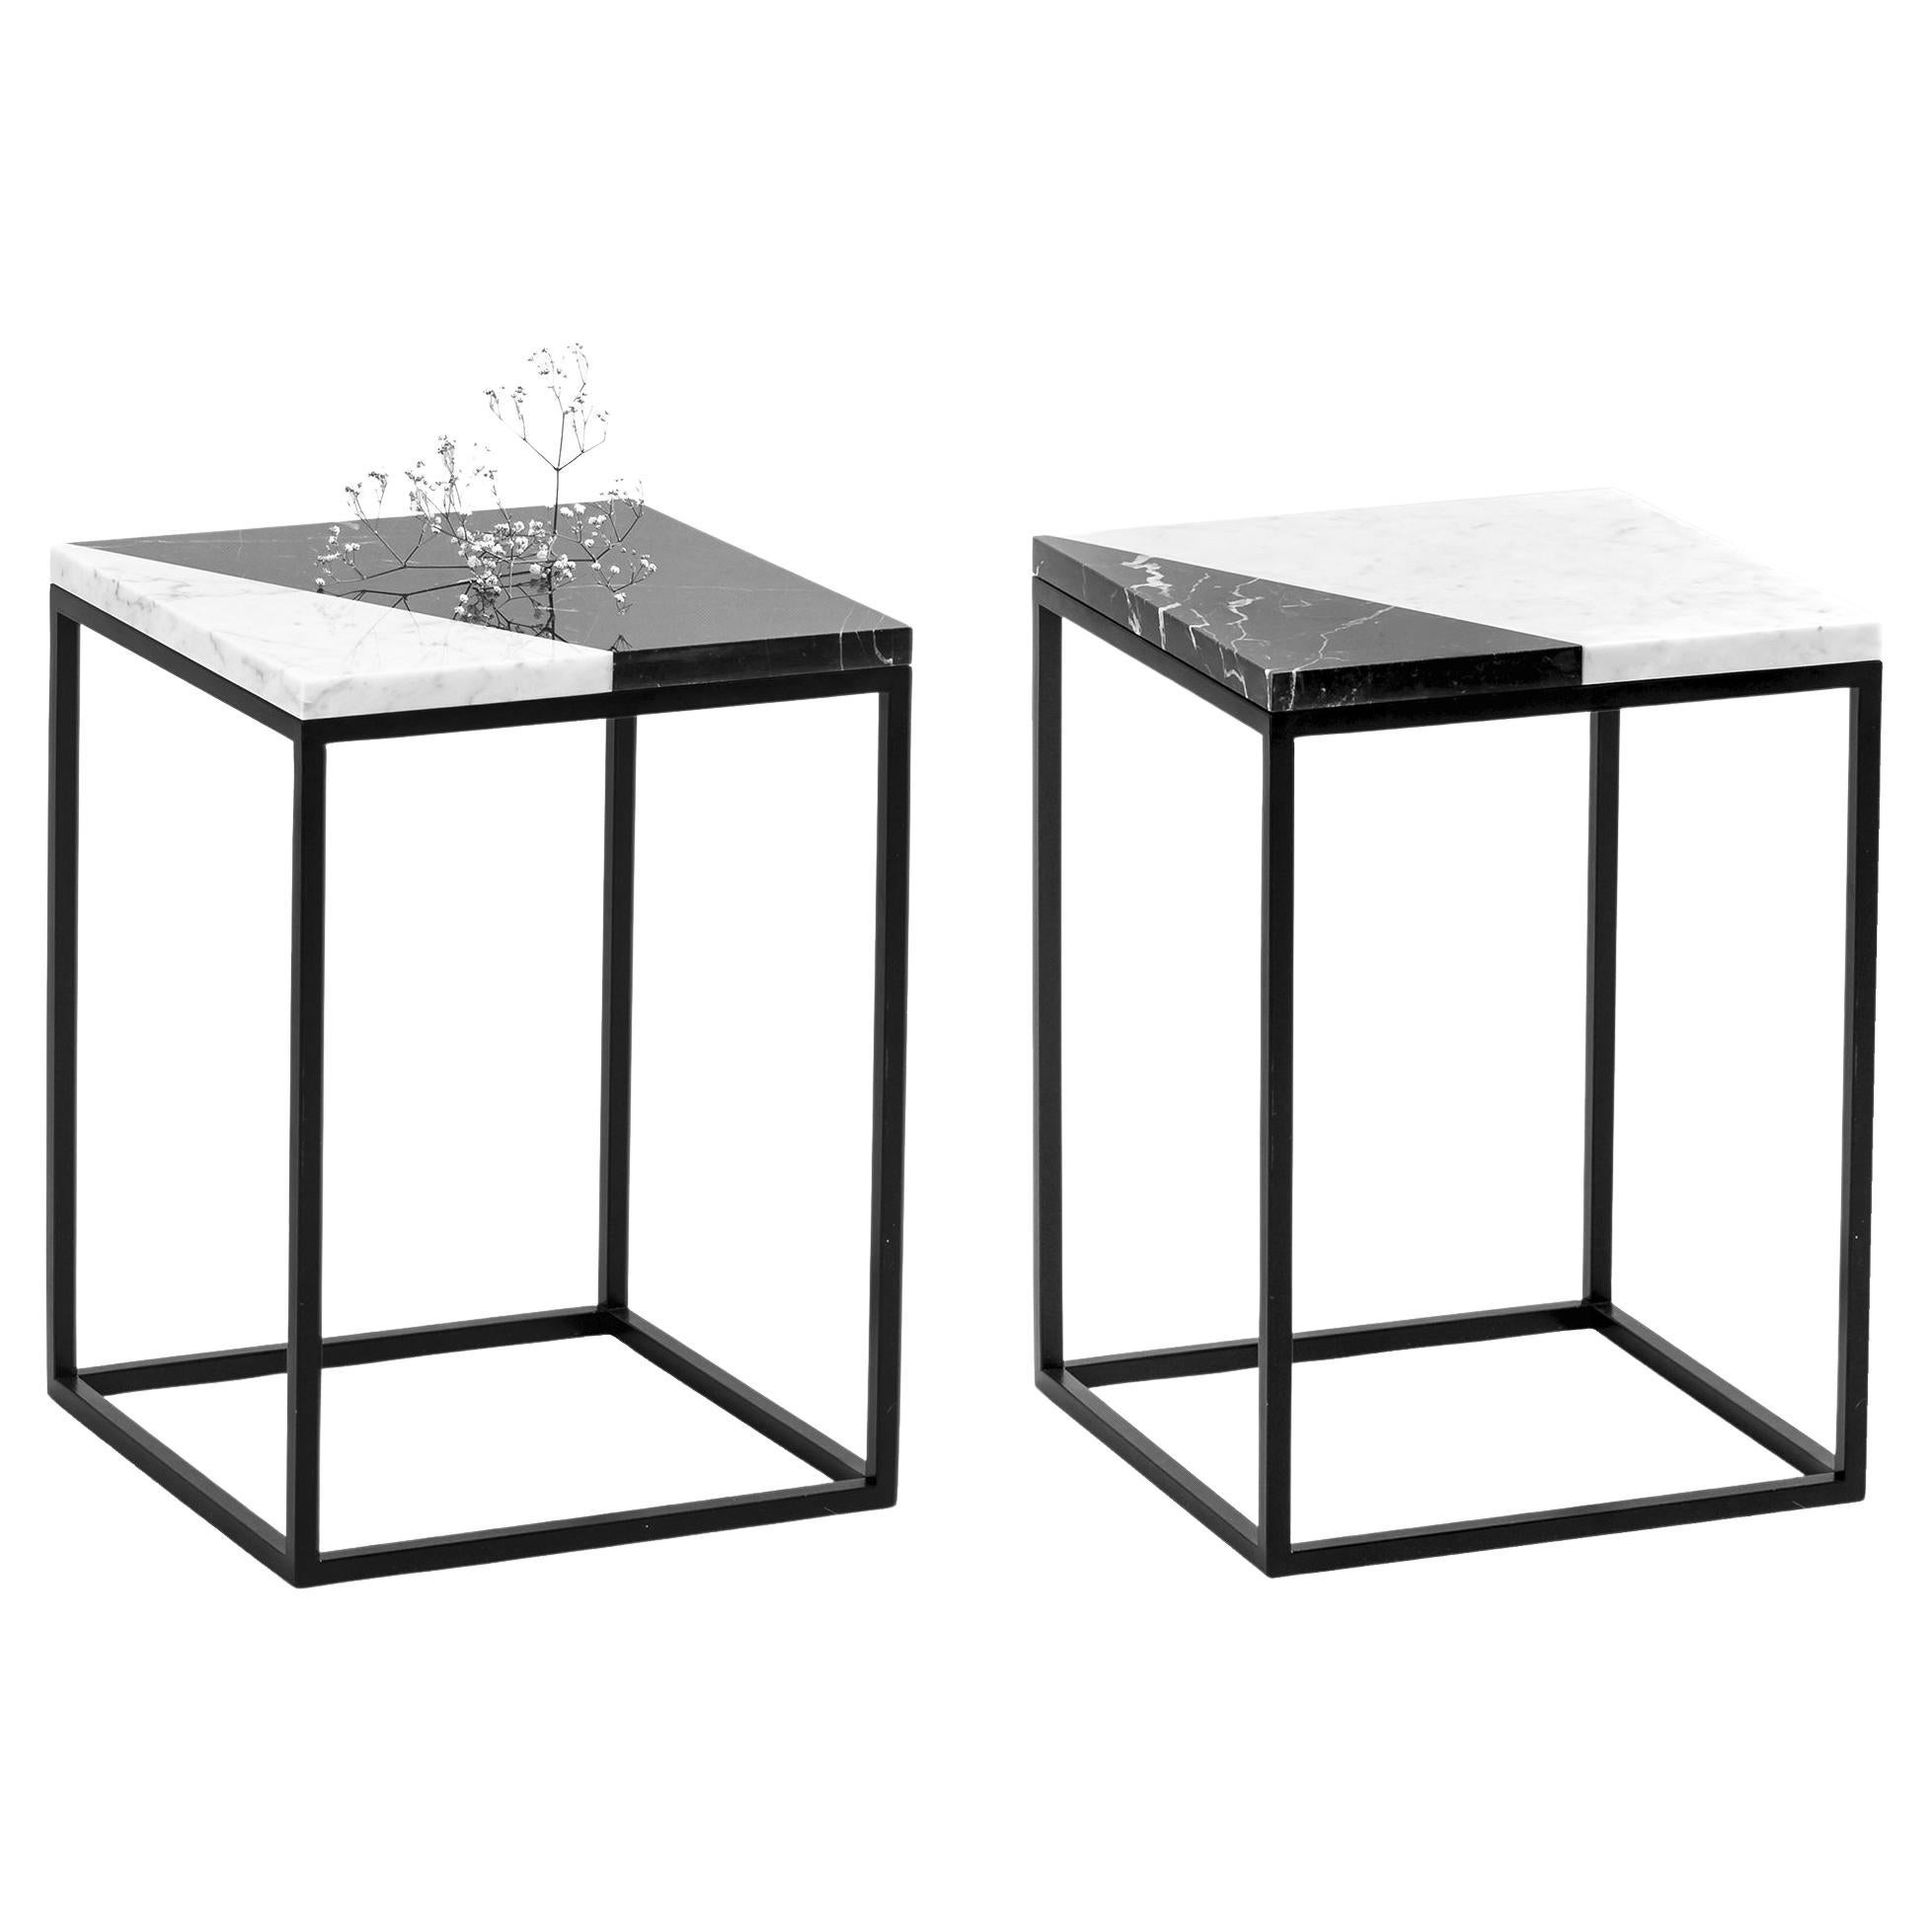 Set of 2 Small Black and White Cut Side Tables by Un’common